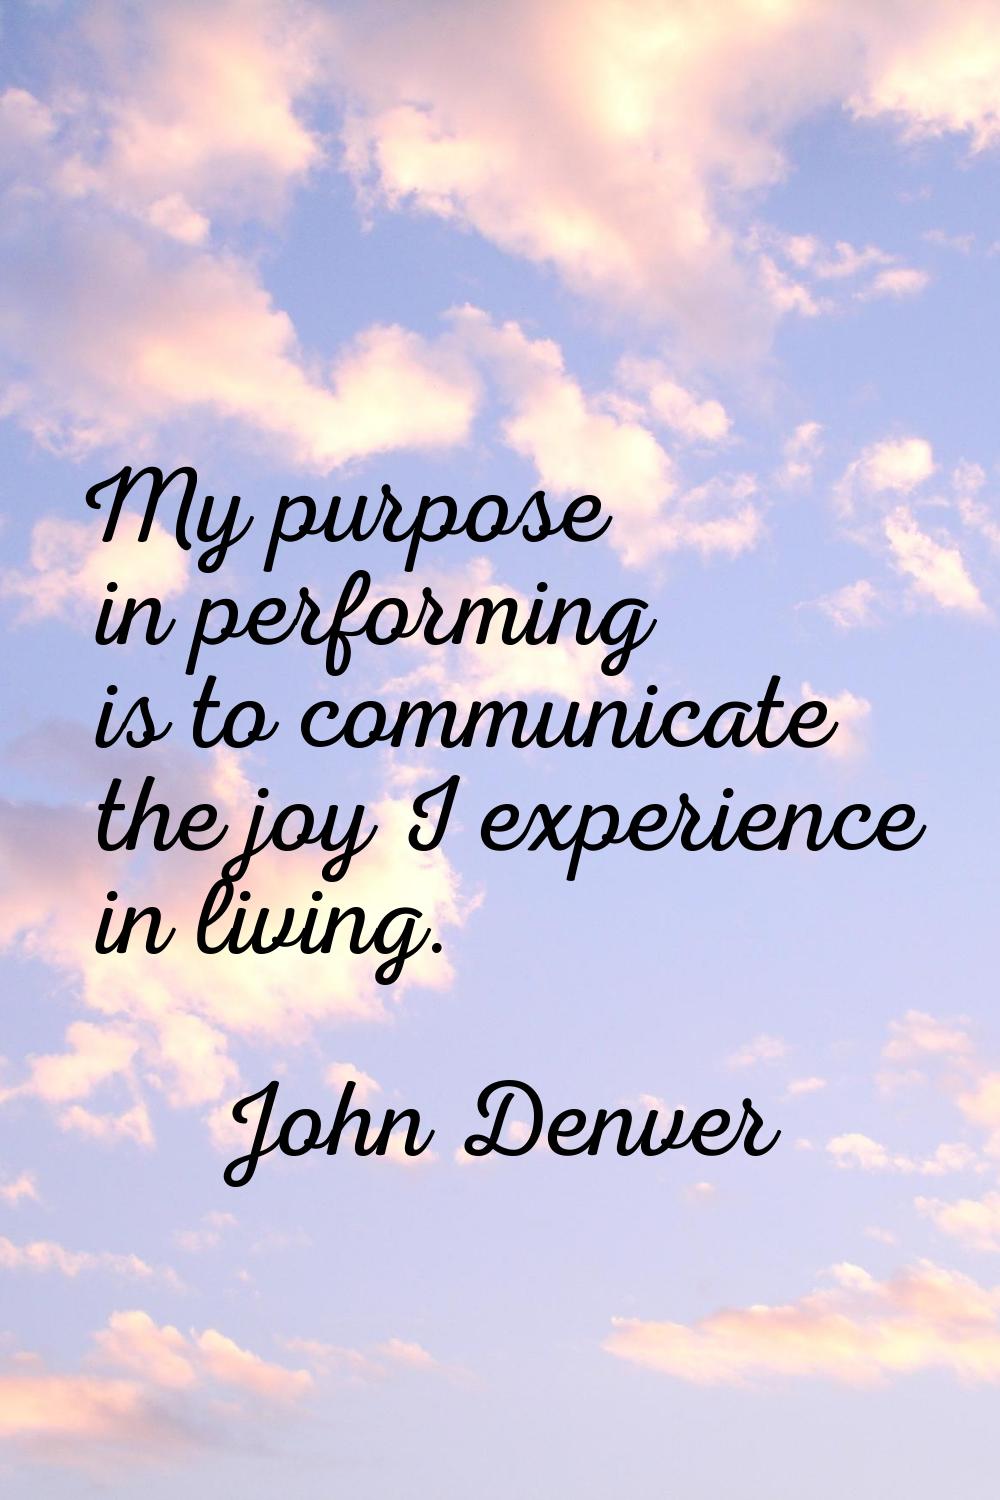 My purpose in performing is to communicate the joy I experience in living.